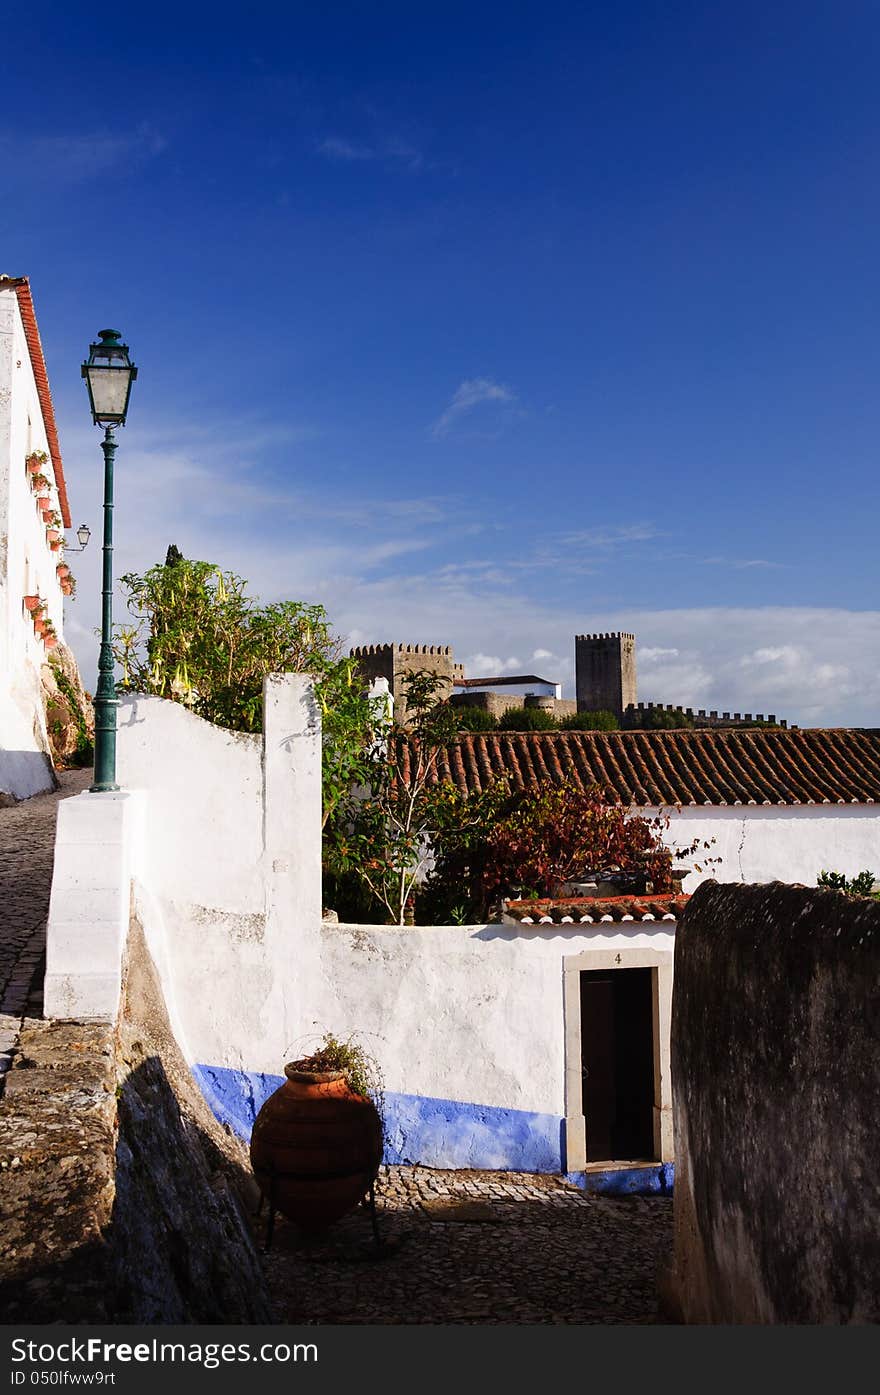 Old beautiful houses in medieval city of Obidos, Portugal with castle walls in background